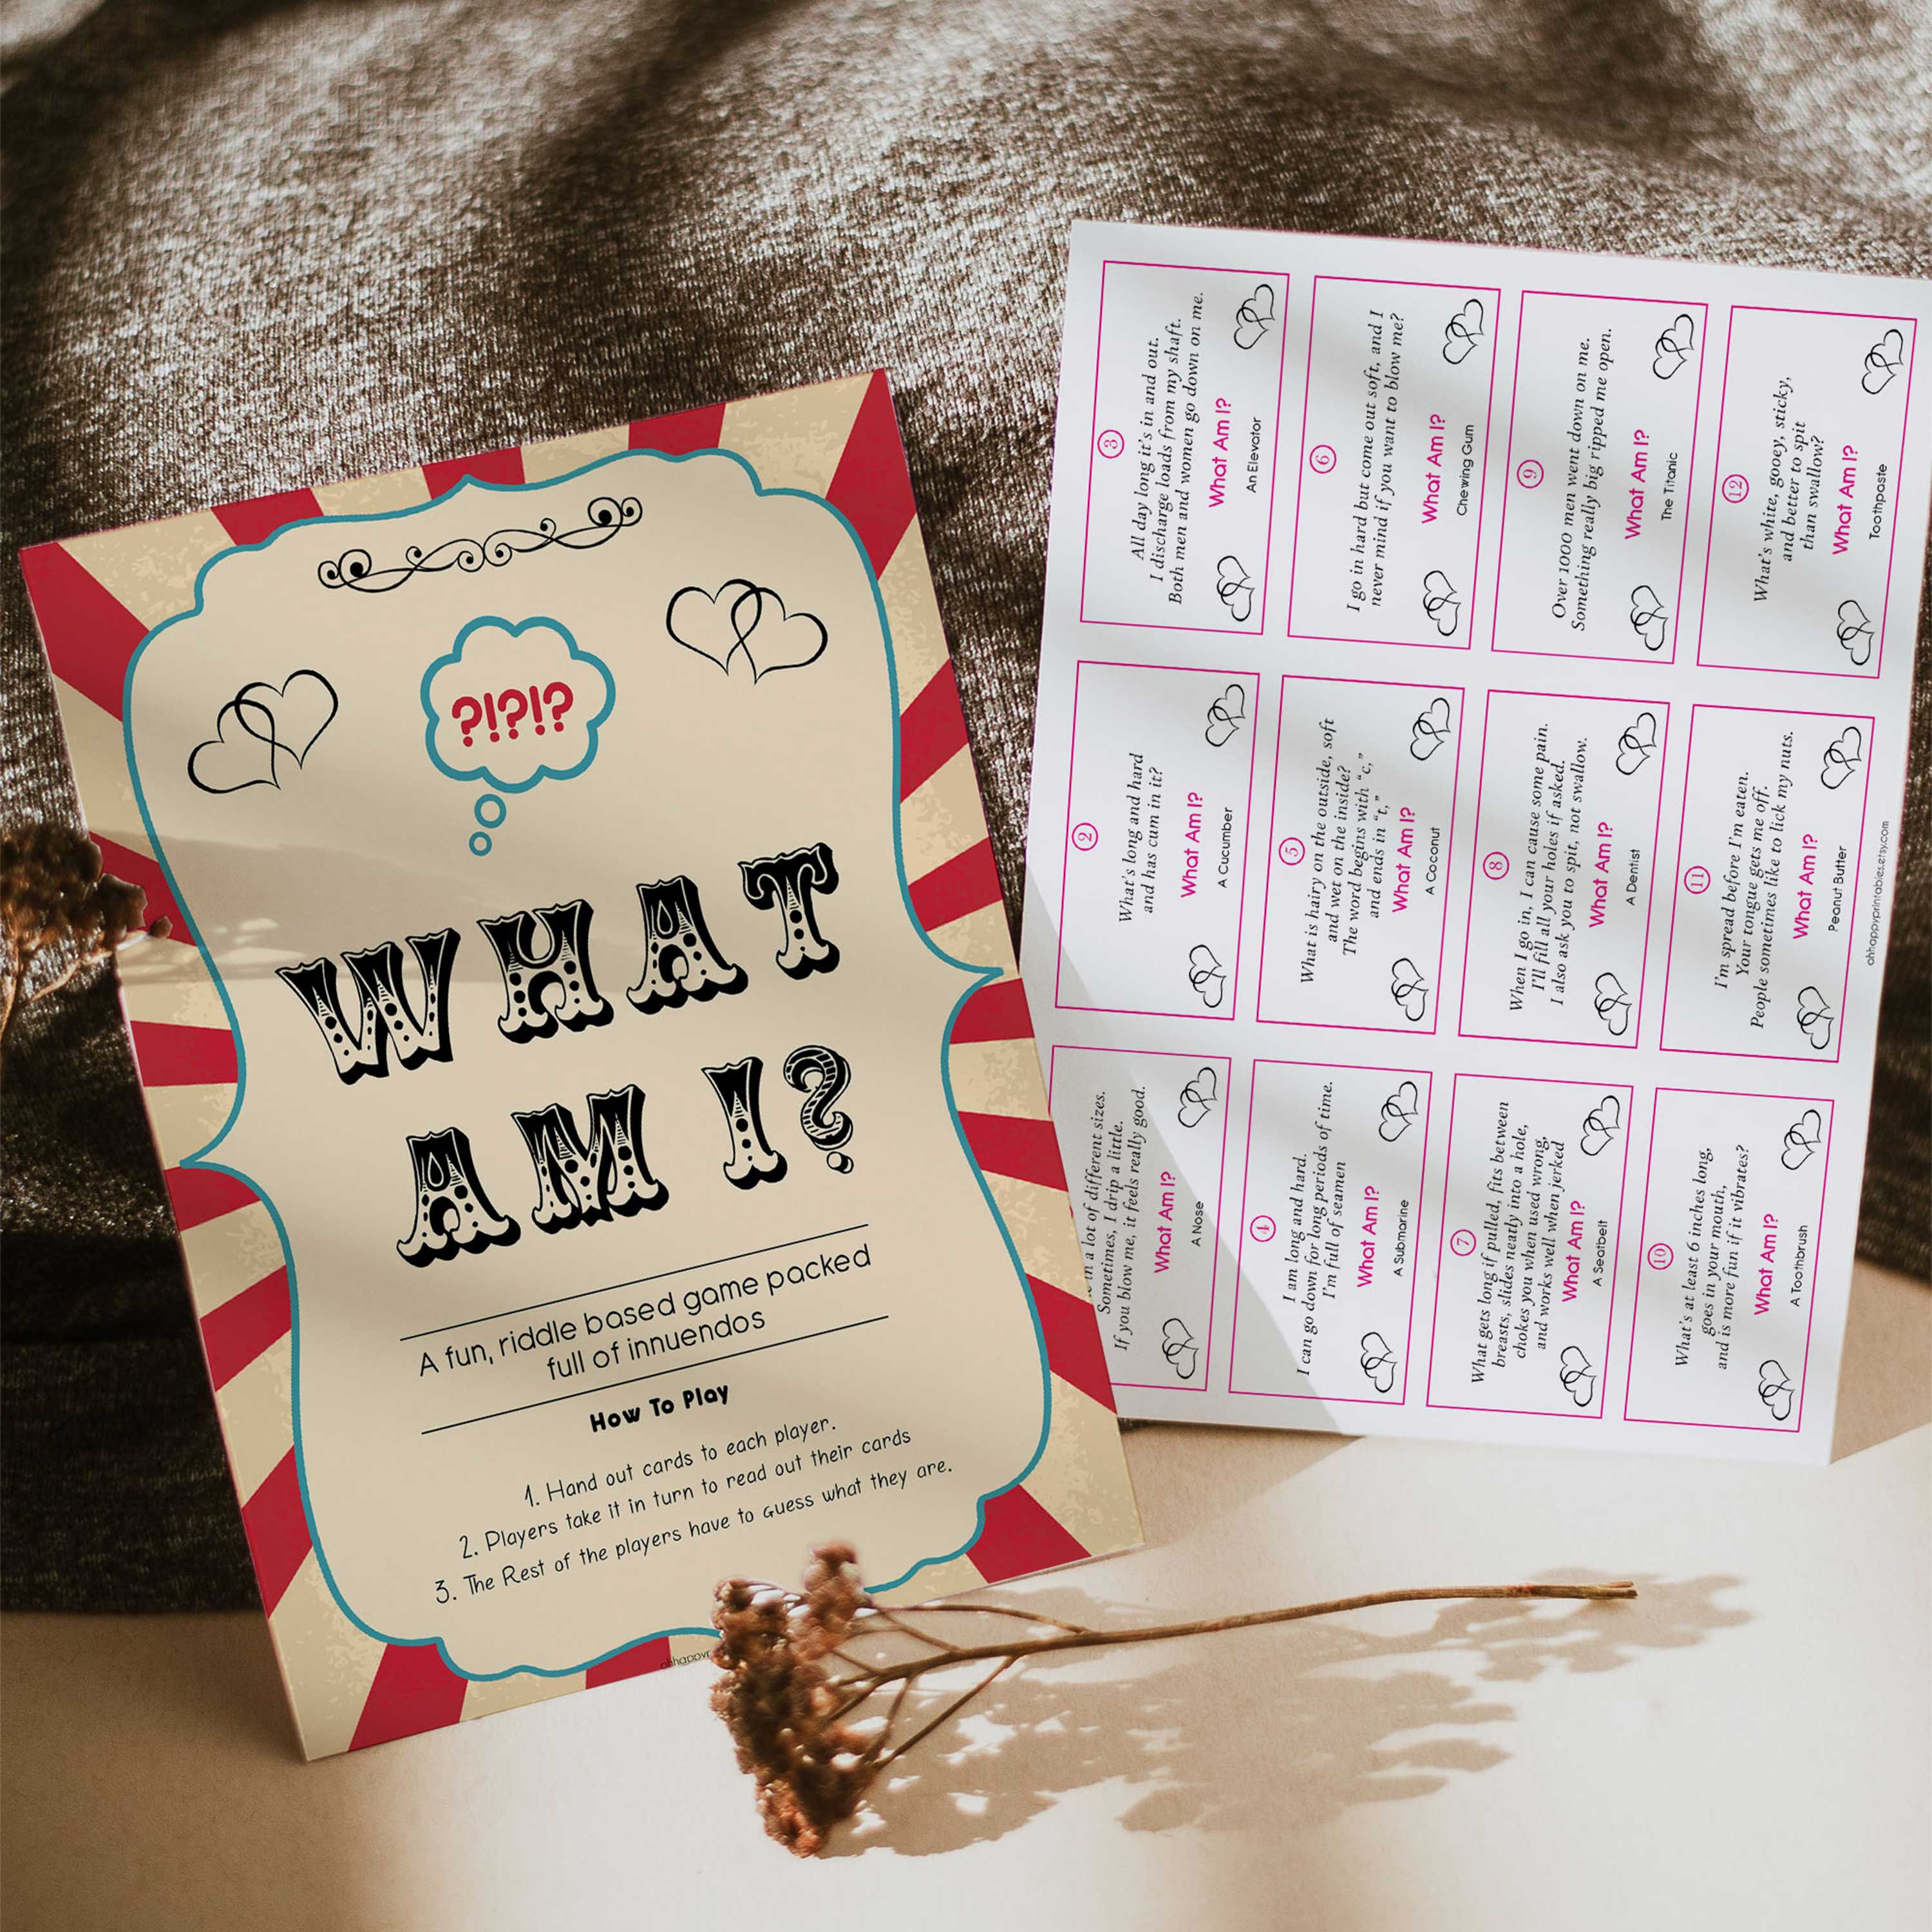 Circus what am I riddle game baby shower games, circus baby games, carnival baby games, printable baby games, fun baby games, popular baby games, carnival baby shower, carnival theme